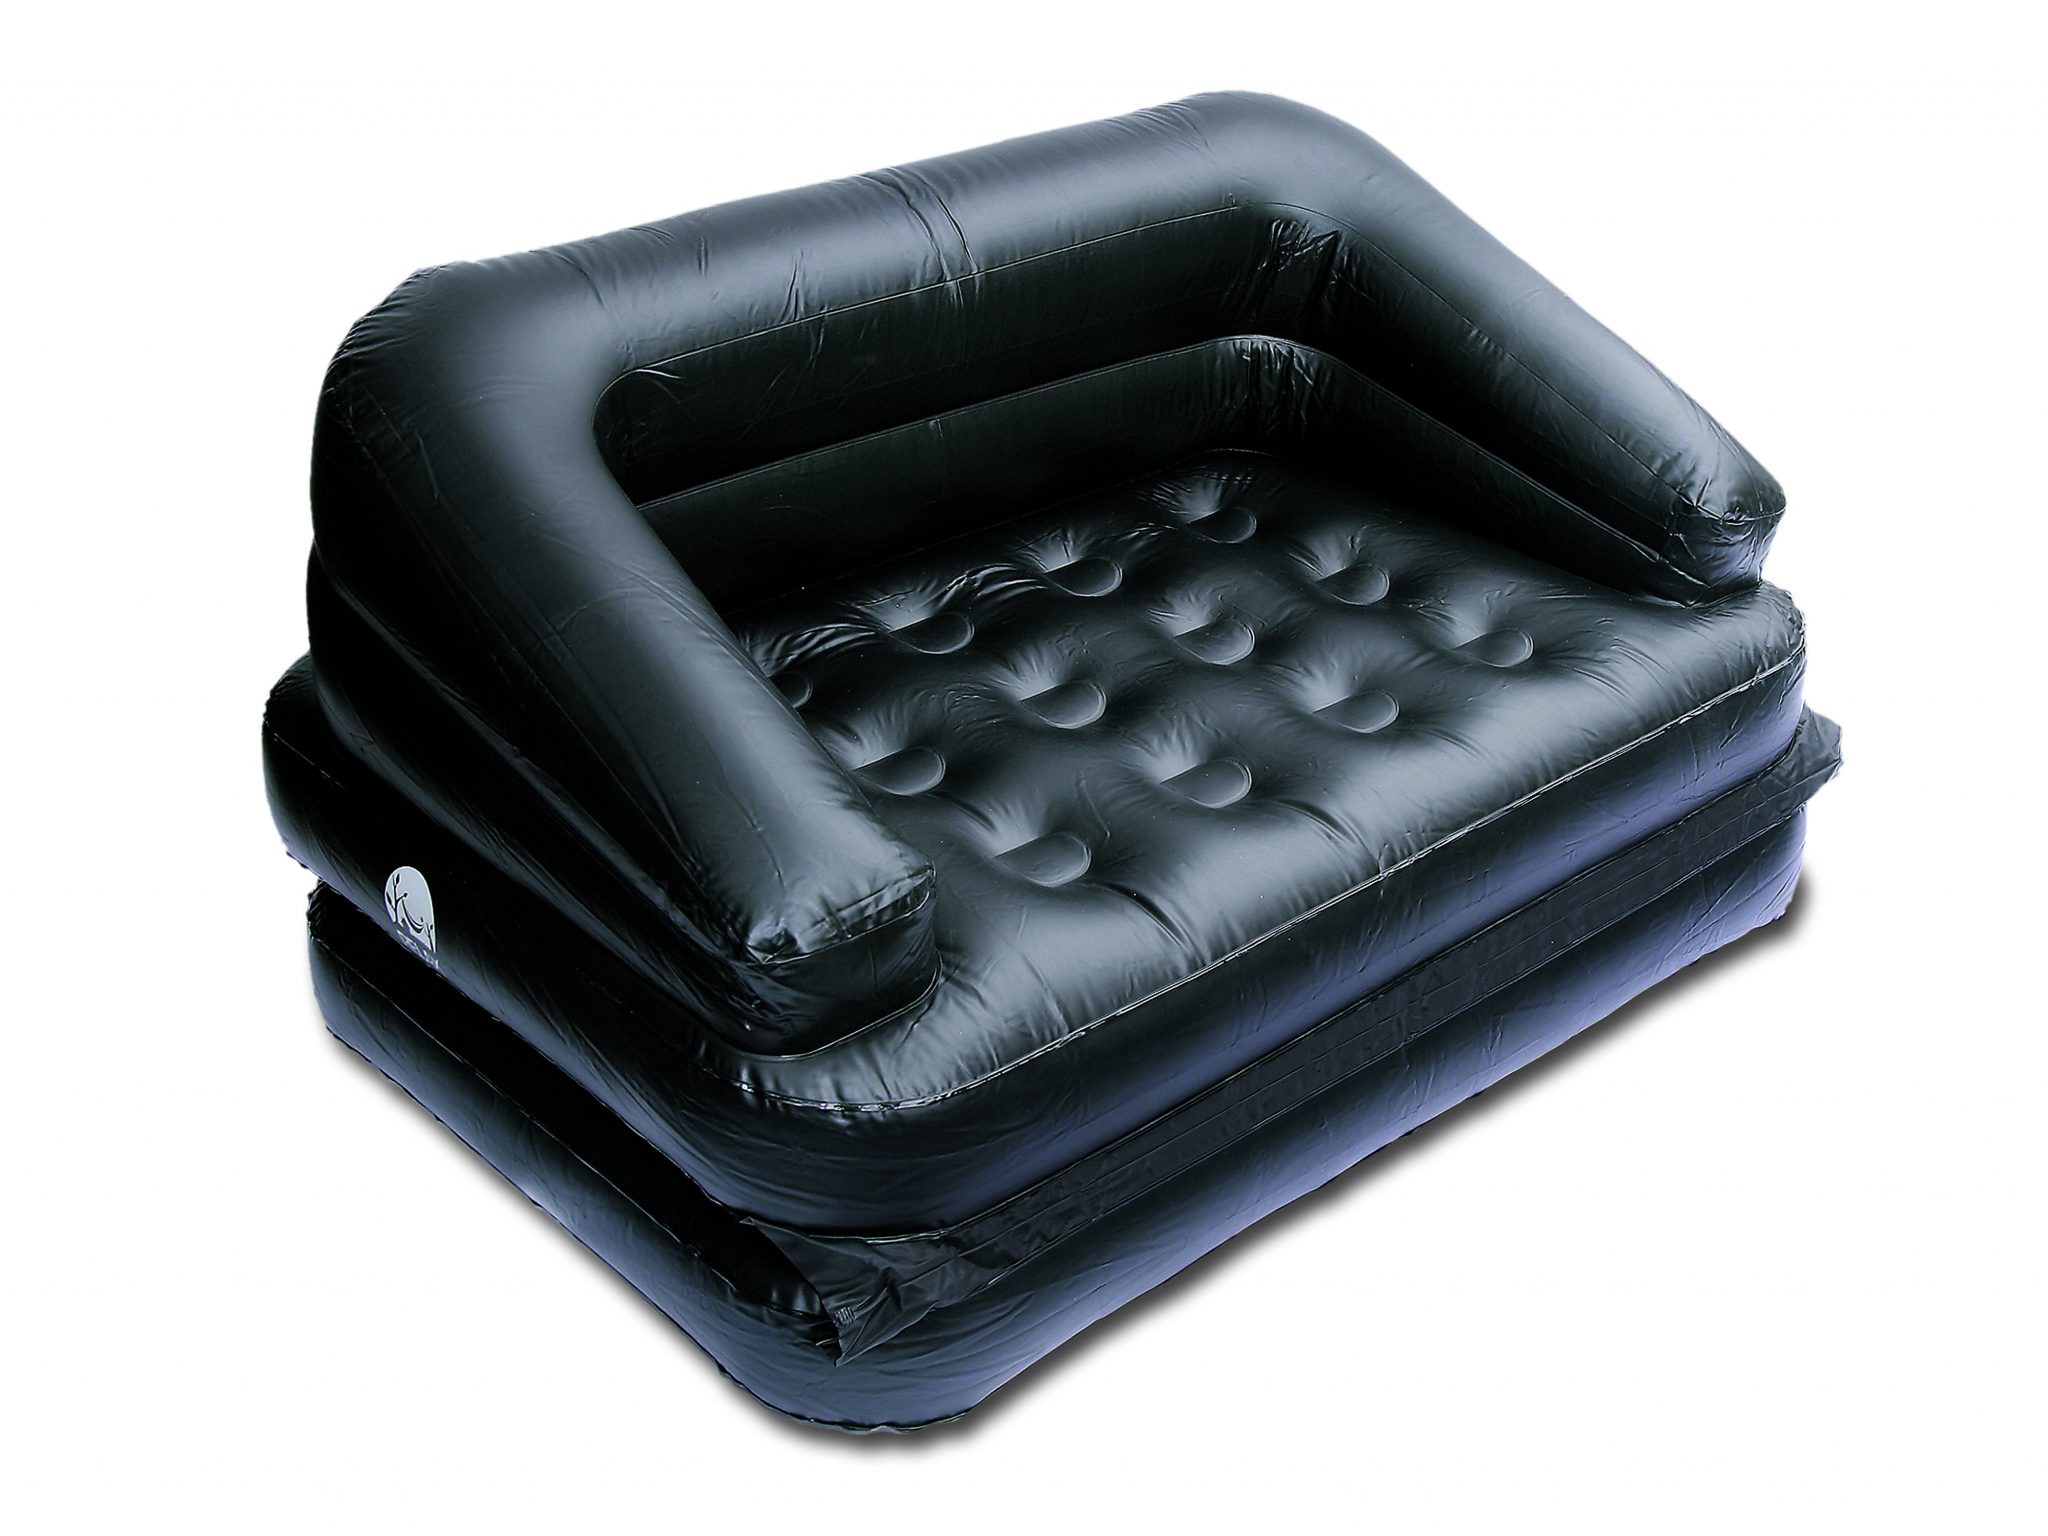 sunncamp 5 in 1 inflatable sofa bed review